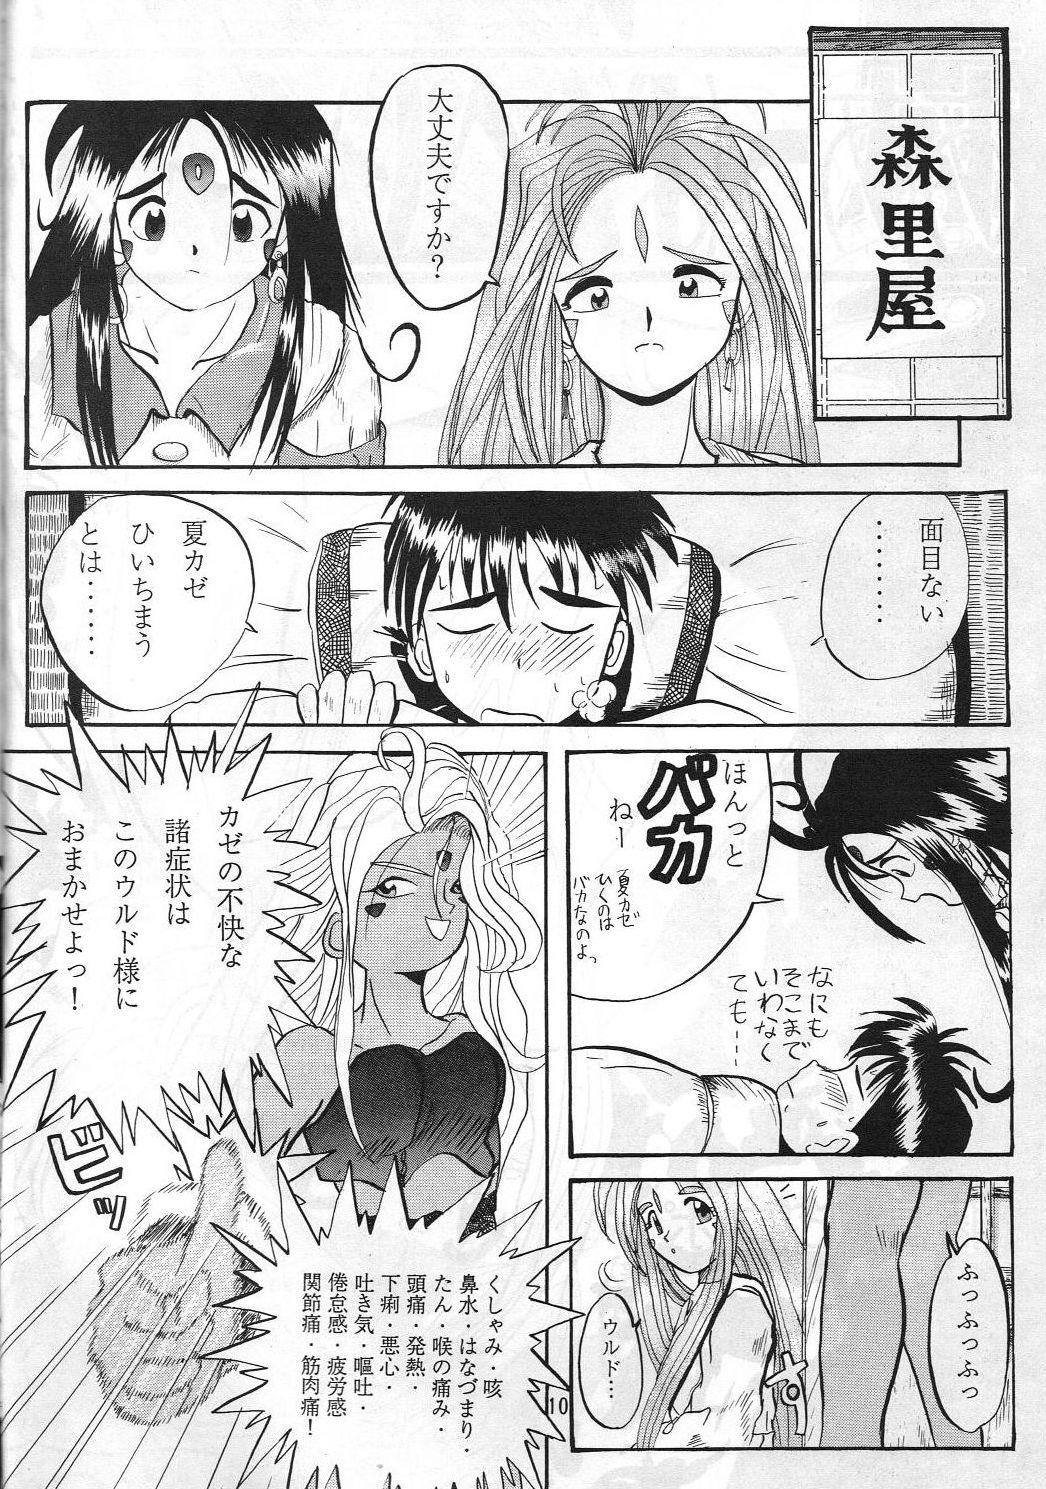 Wrestling Release-1 - Ah my goddess Tenchi muyo Lingerie - Page 11